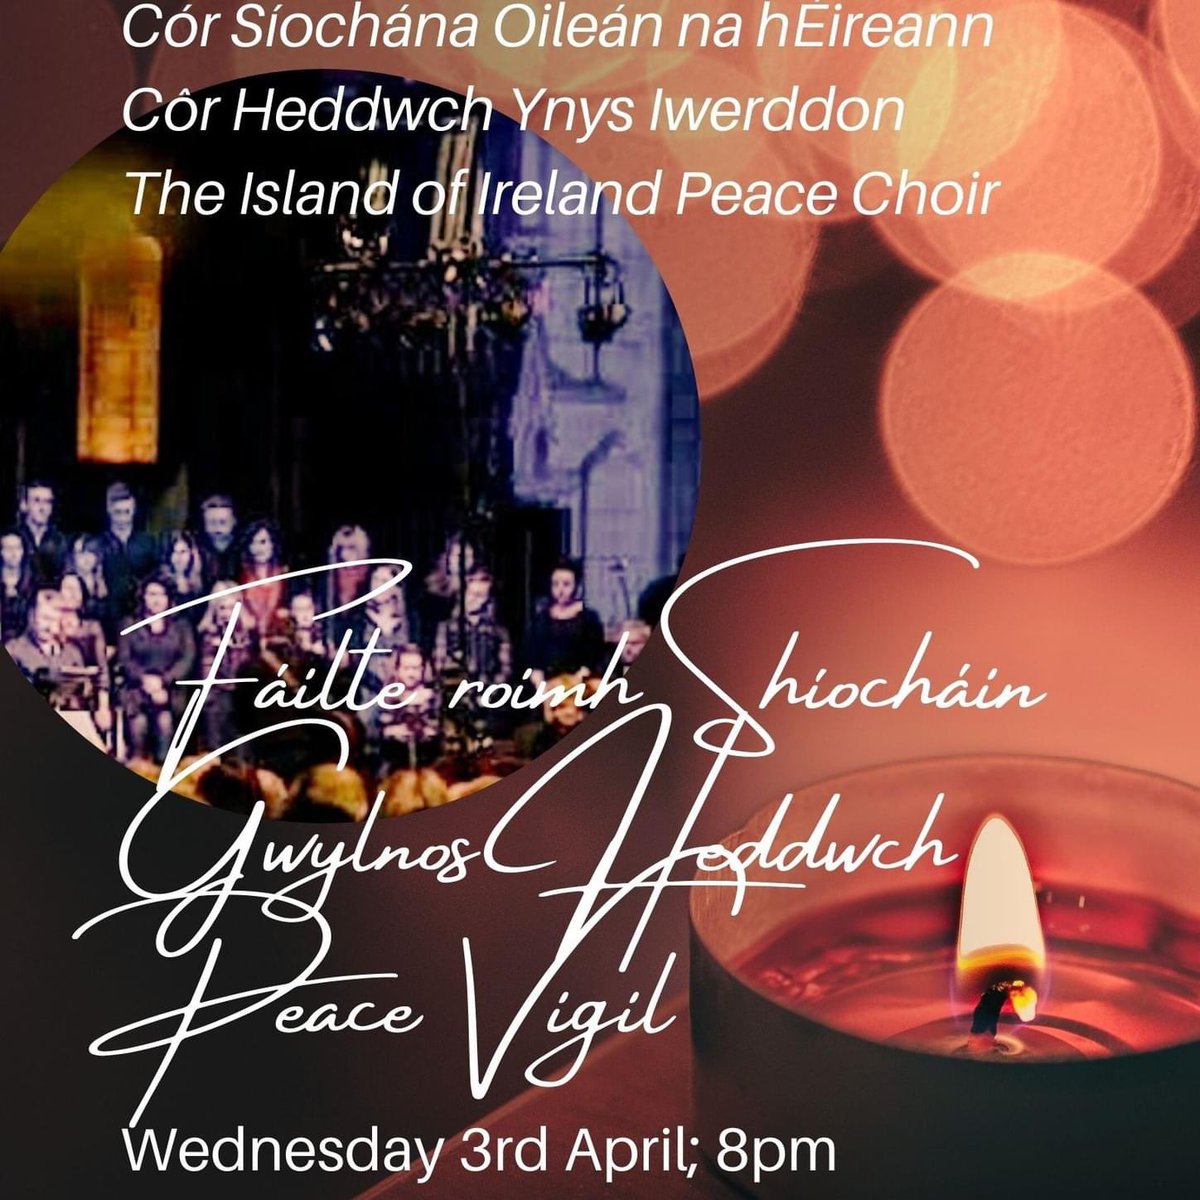 Come and join us for a Taize Peace Vigil, 8pm, Wed 3 April at the Cathedral, led by The Island of Ireland Peace Choir. All Welcome. Croeso cynnes i bawb. #taizé #eastertide #peacevigil #ohlordhearmyprayer